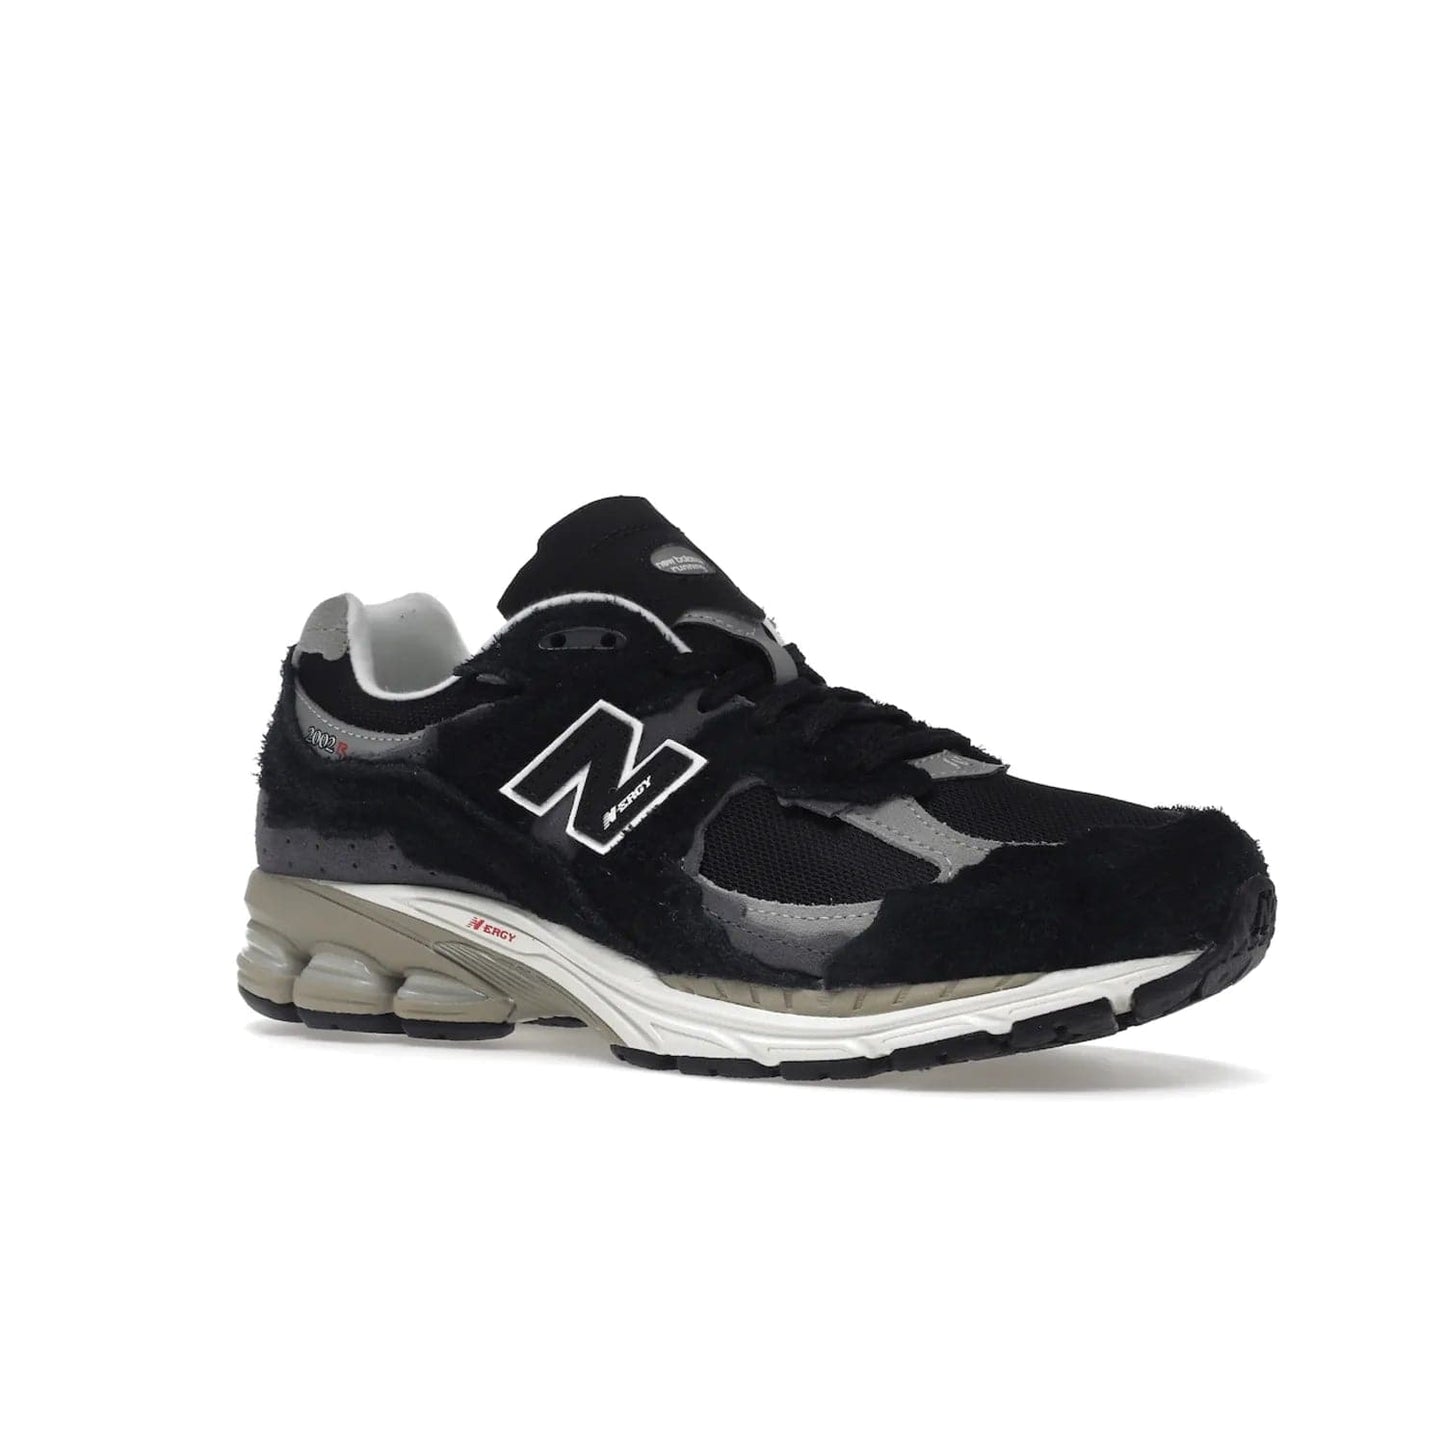 New Balance 2002R Protection Pack Black Grey - Image 4 - Only at www.BallersClubKickz.com - Look stylish in the New Balance 2002R Protection Pack Black Grey. Uppers constructed from premium materials like mesh and synthetic overlays. Iconic "N" emblem appears in white and black. ABZORB midsole for shock absorption and responsiveness. Black outsole for grip and traction. Lacing system offers customized fit and cushioned tongue and collar offer comfort and stability. Step up your style with this must-have